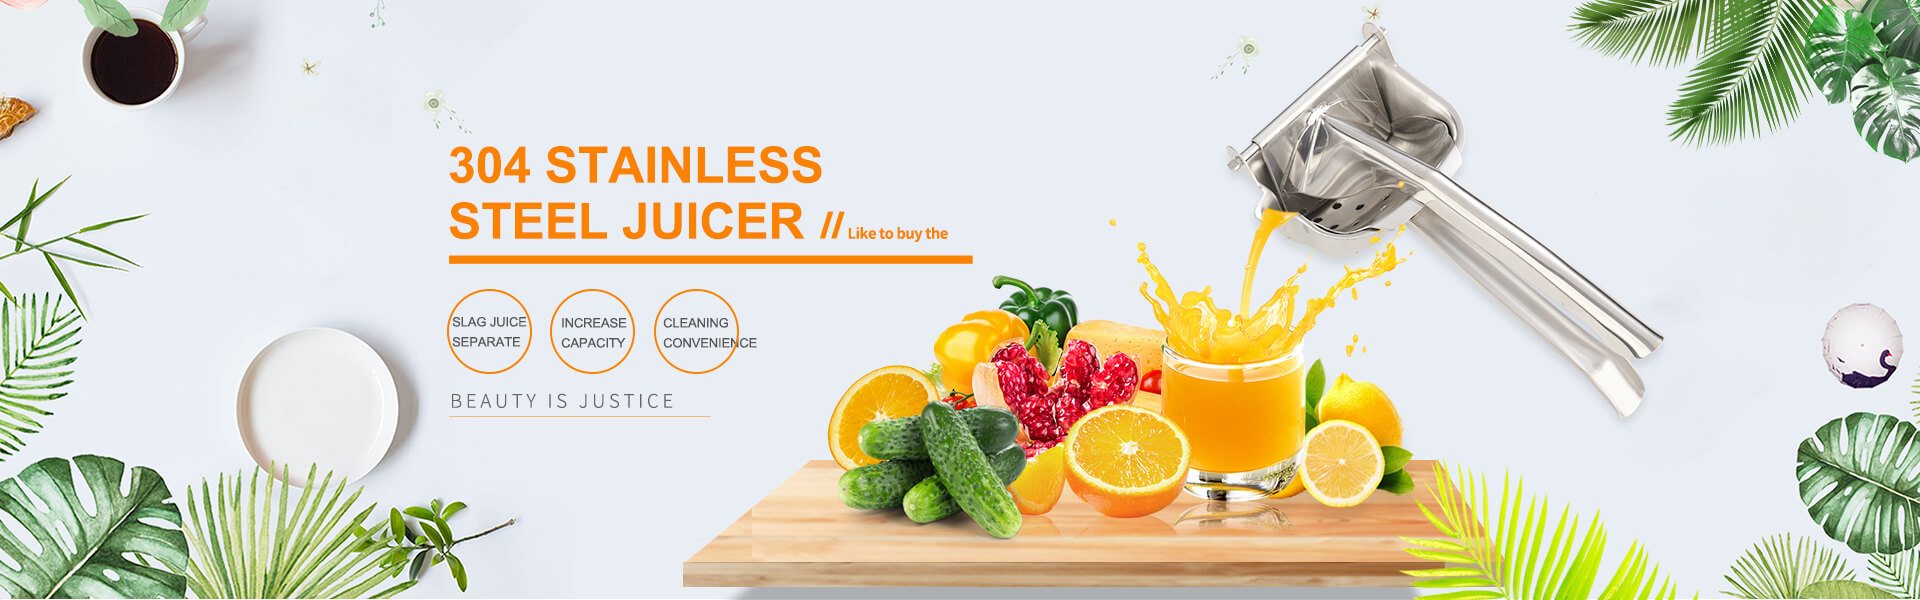 304 stainless steel juicer